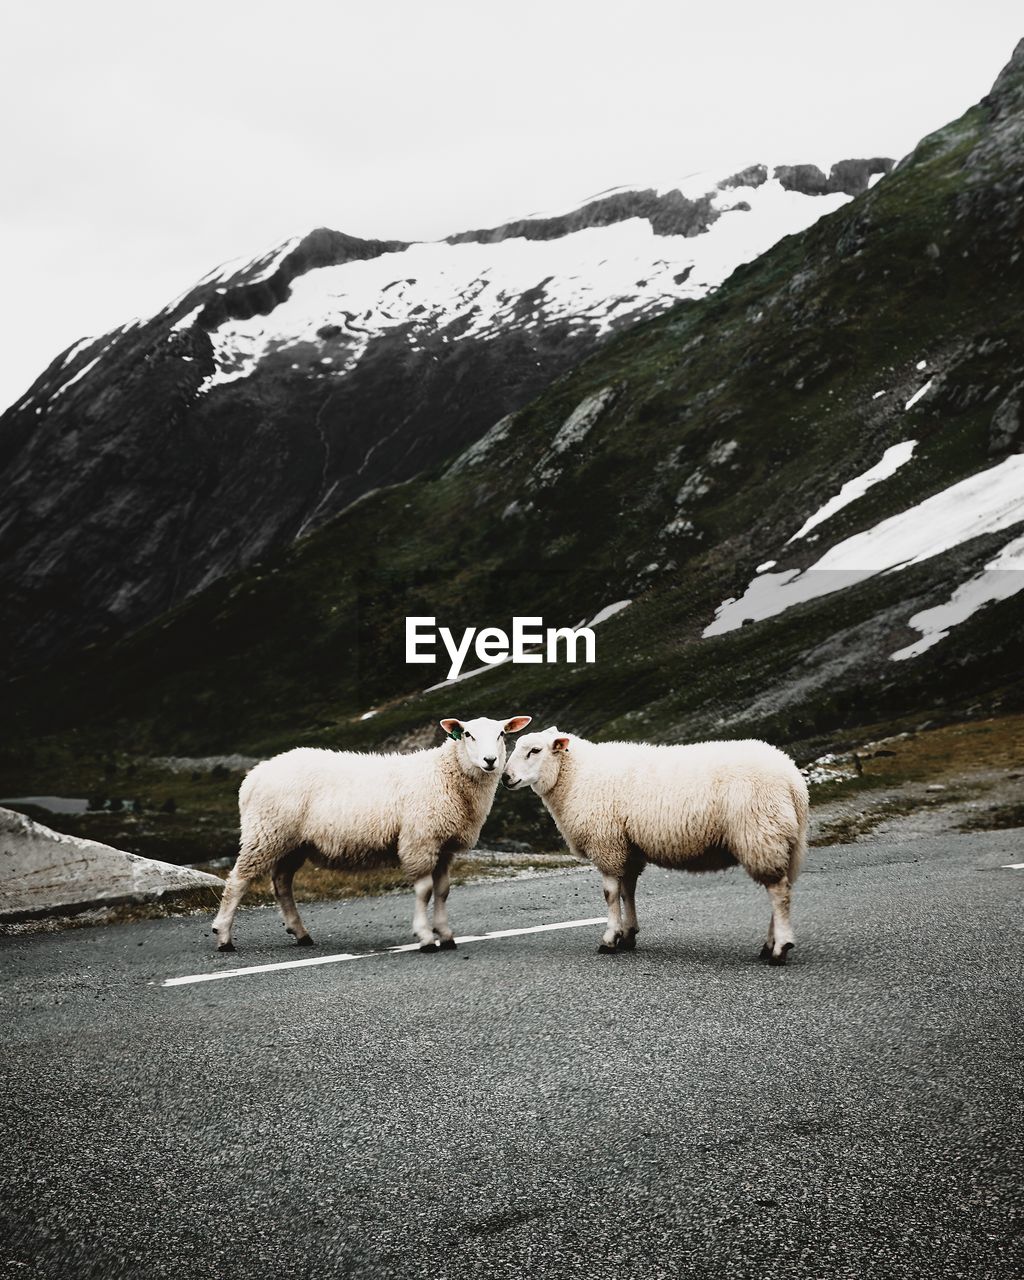 Sheep standing on road against mountains